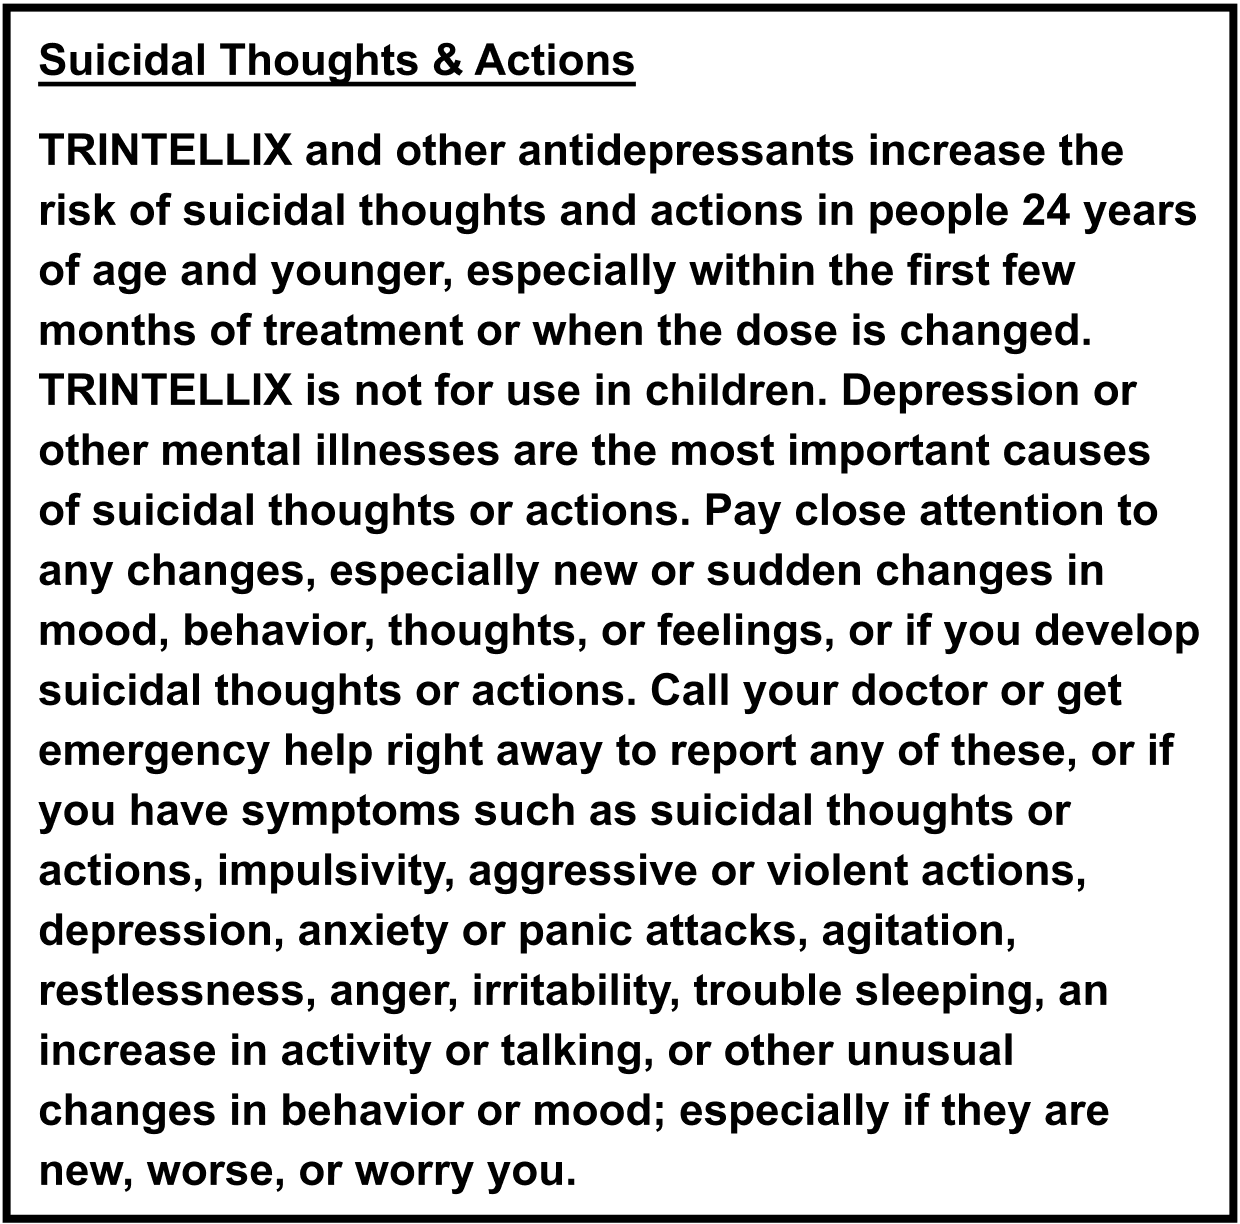 Trintellix ISI Suicidal Thoughts & Actions